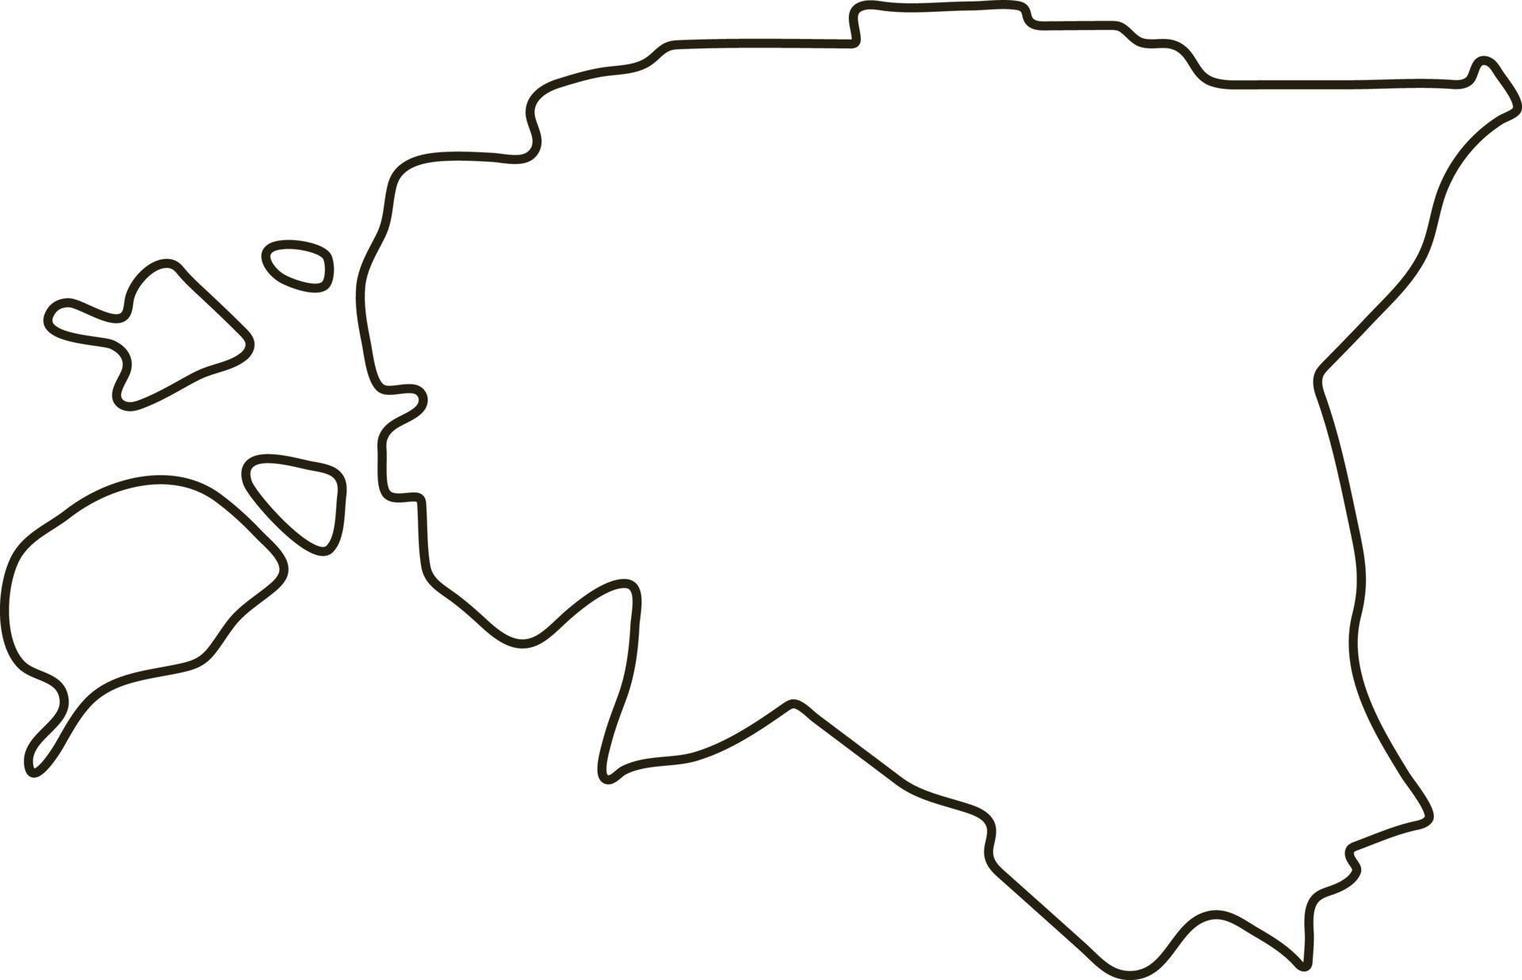 Map of Estonia. Outline map vector illustration